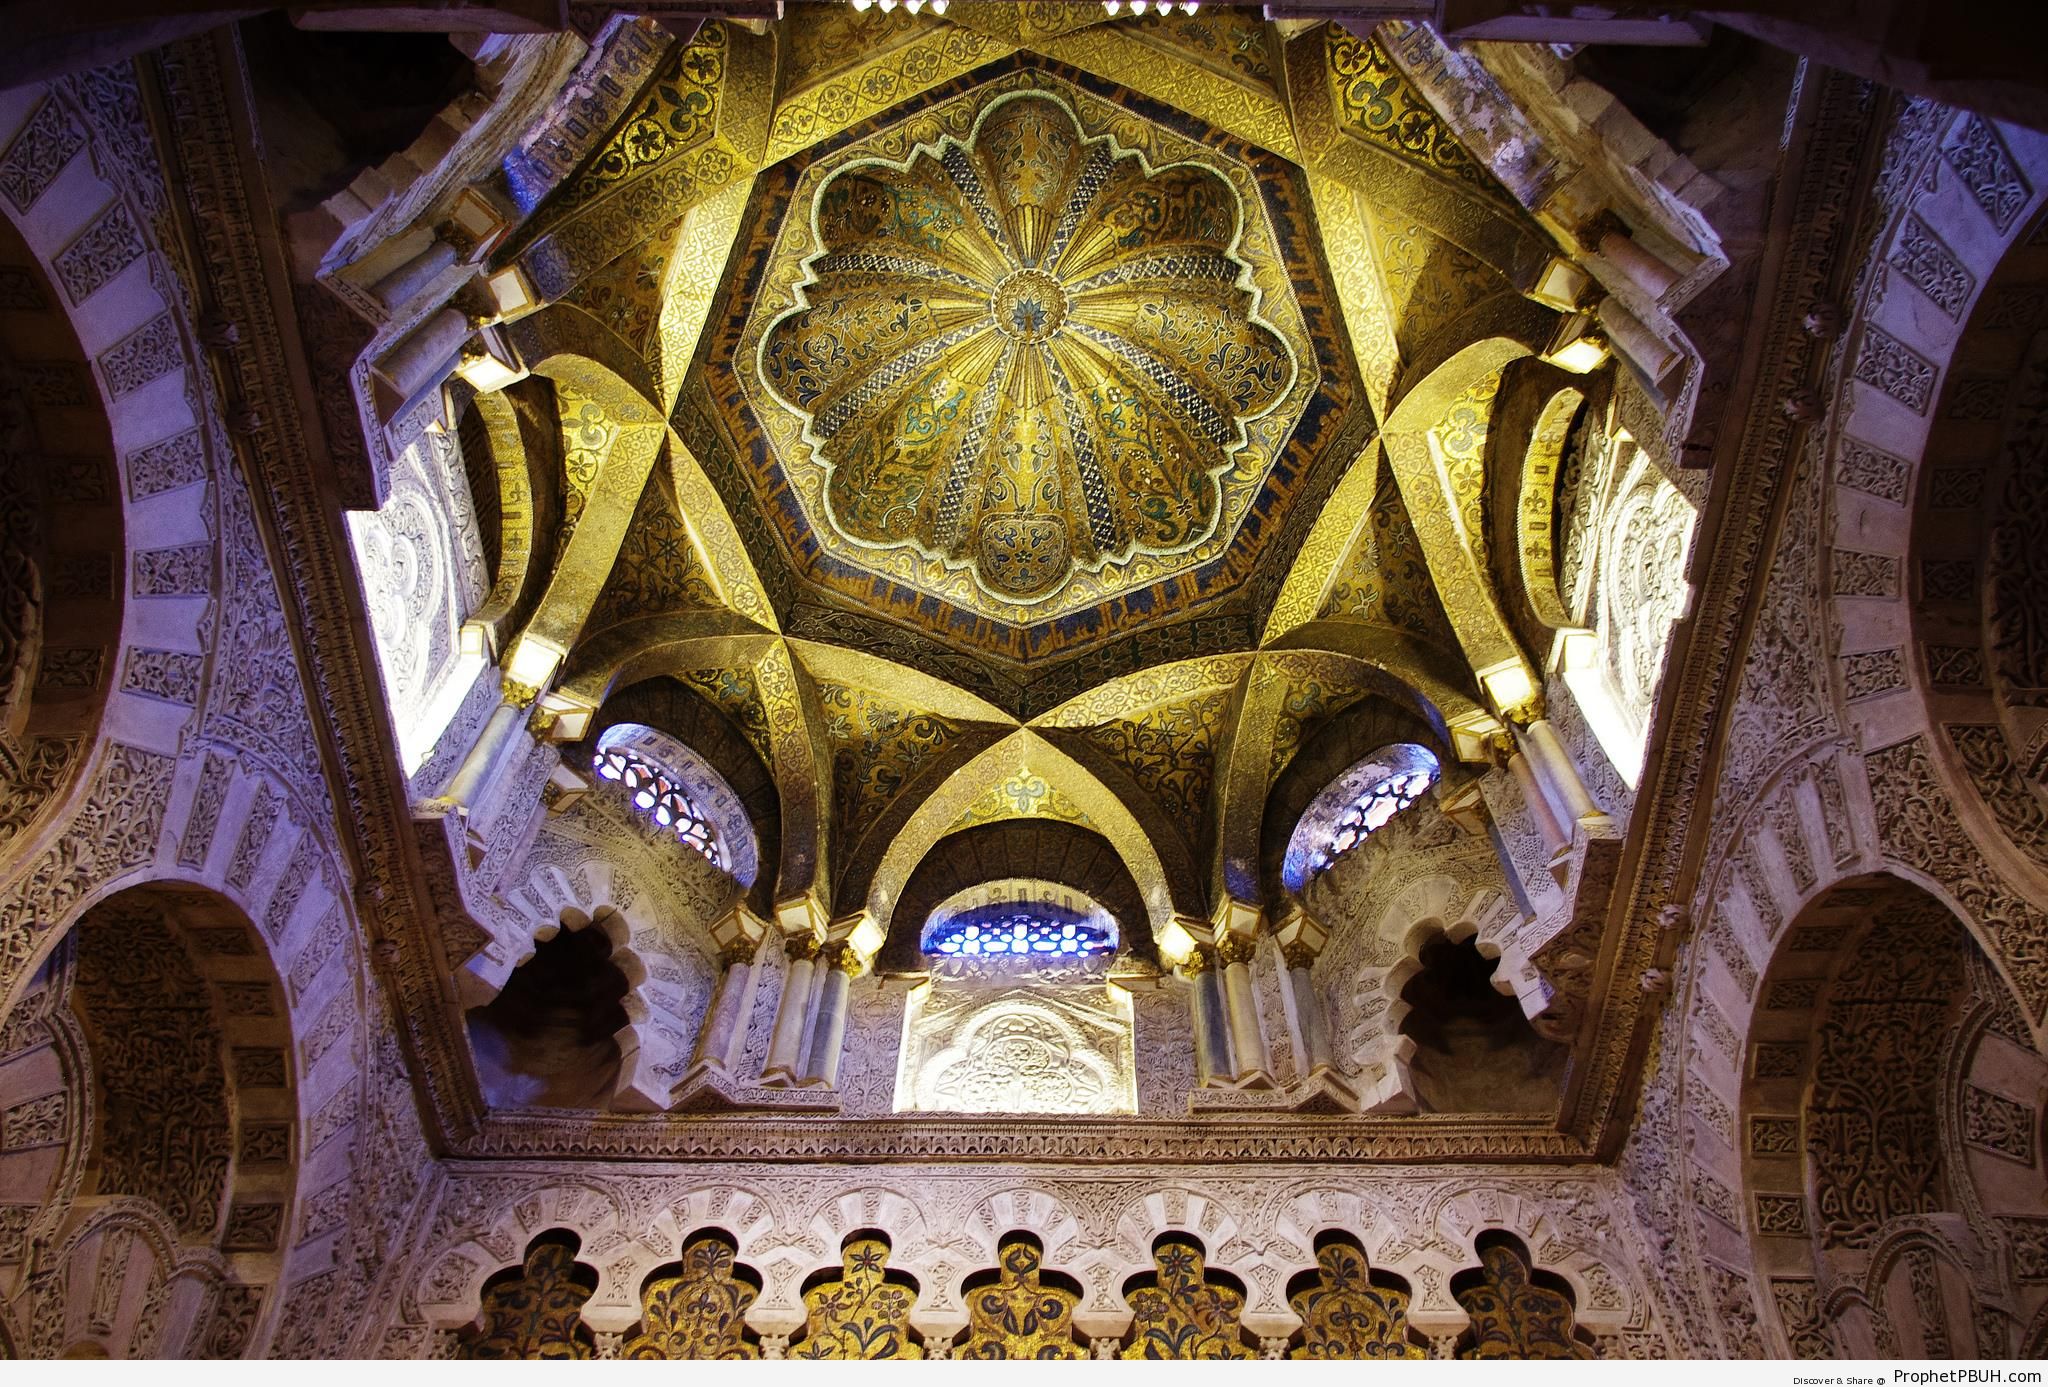 Ceiling of The Great Mosque of CÃ³rdoba (Qurtubah) in Andalusia, Spain - Andalusia, Spain -Picture